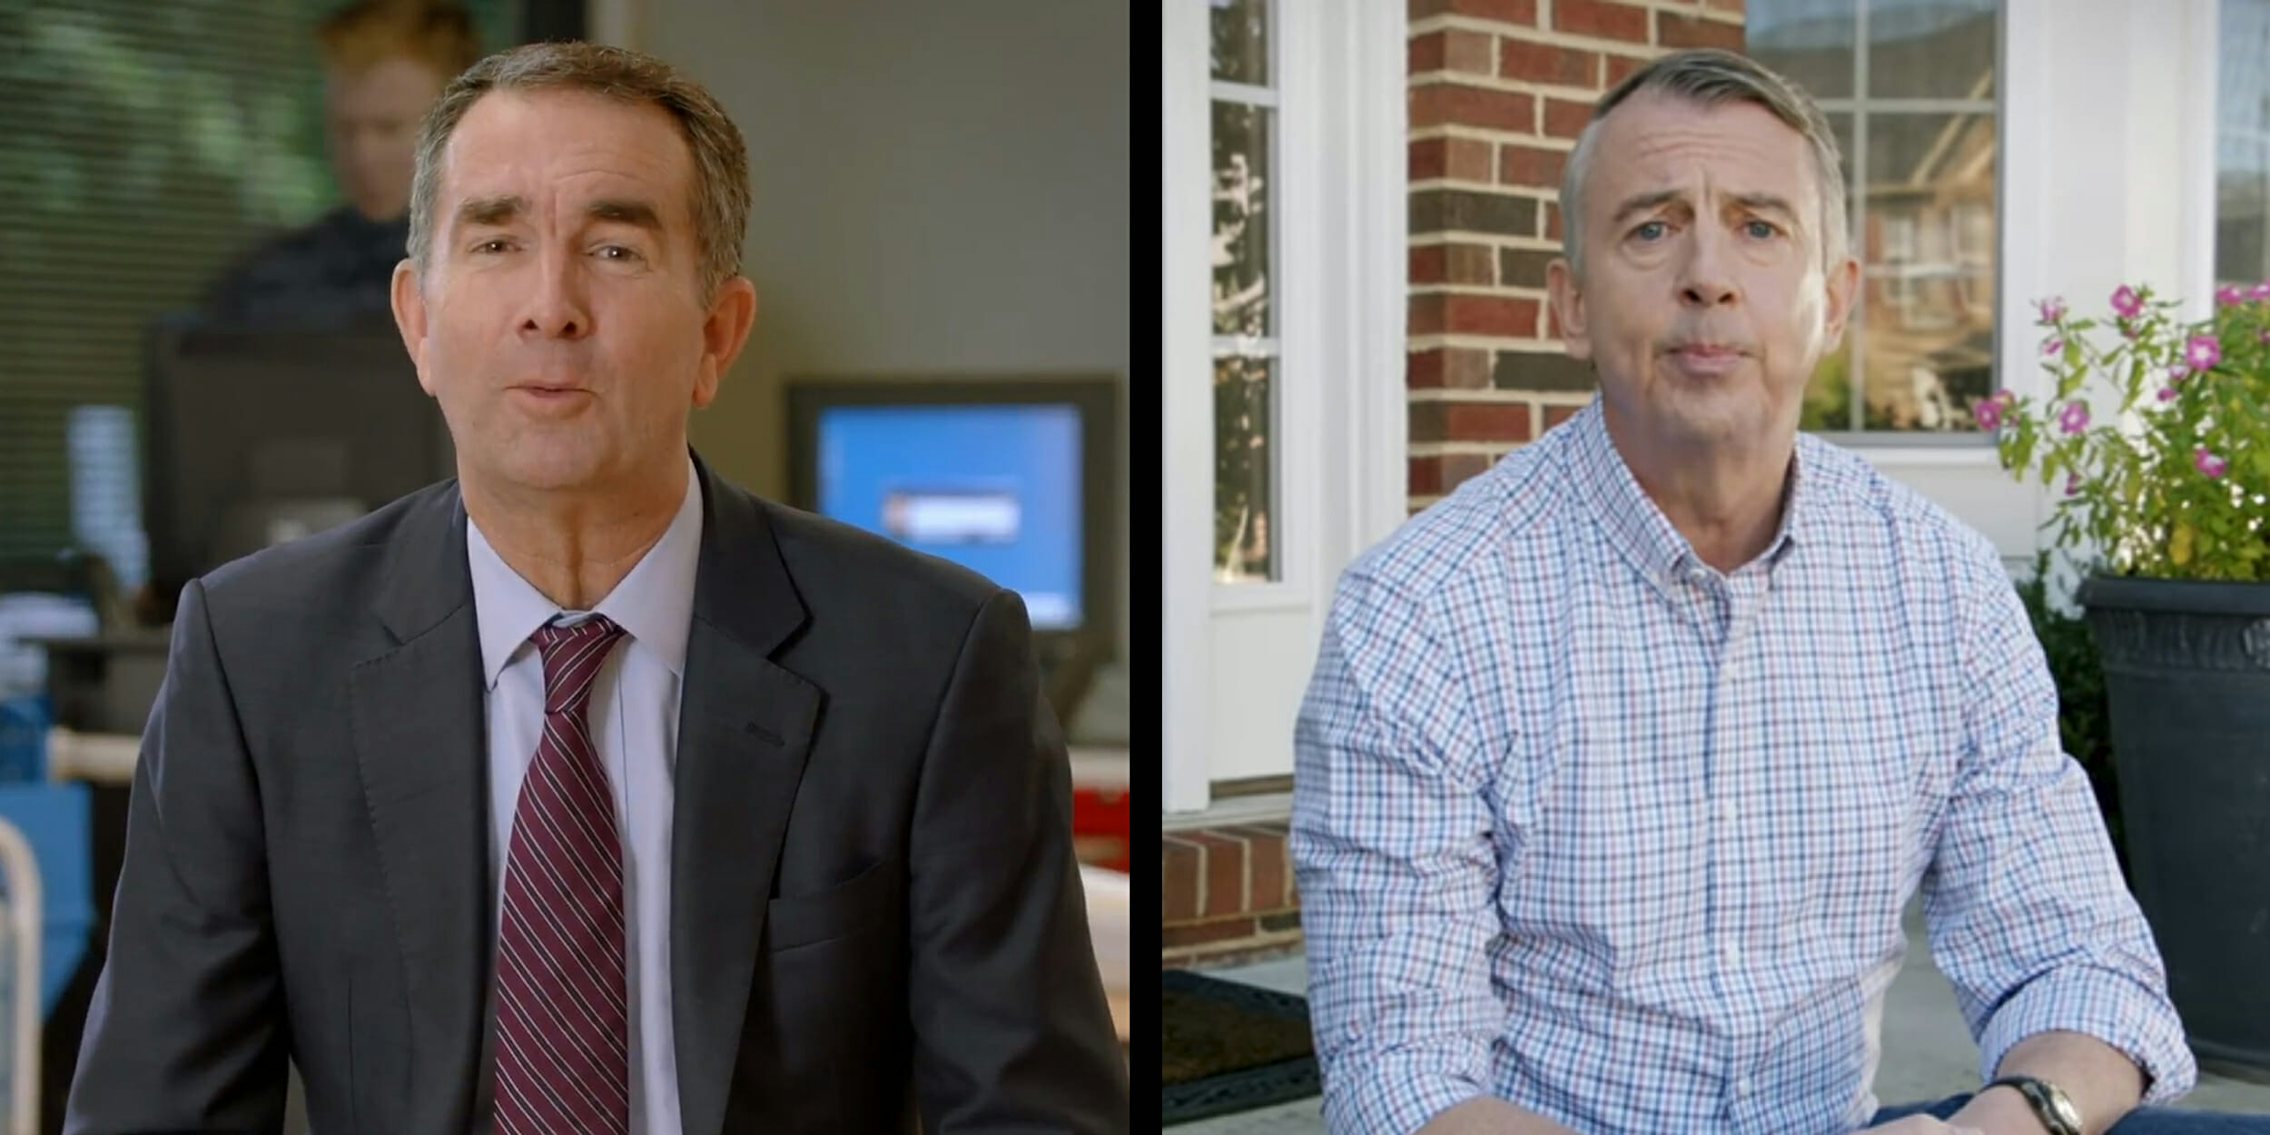 Virginia is one of two states electing a new governor today. Democrat Ralph Northam is facing off against Republican Ed Gillespie.